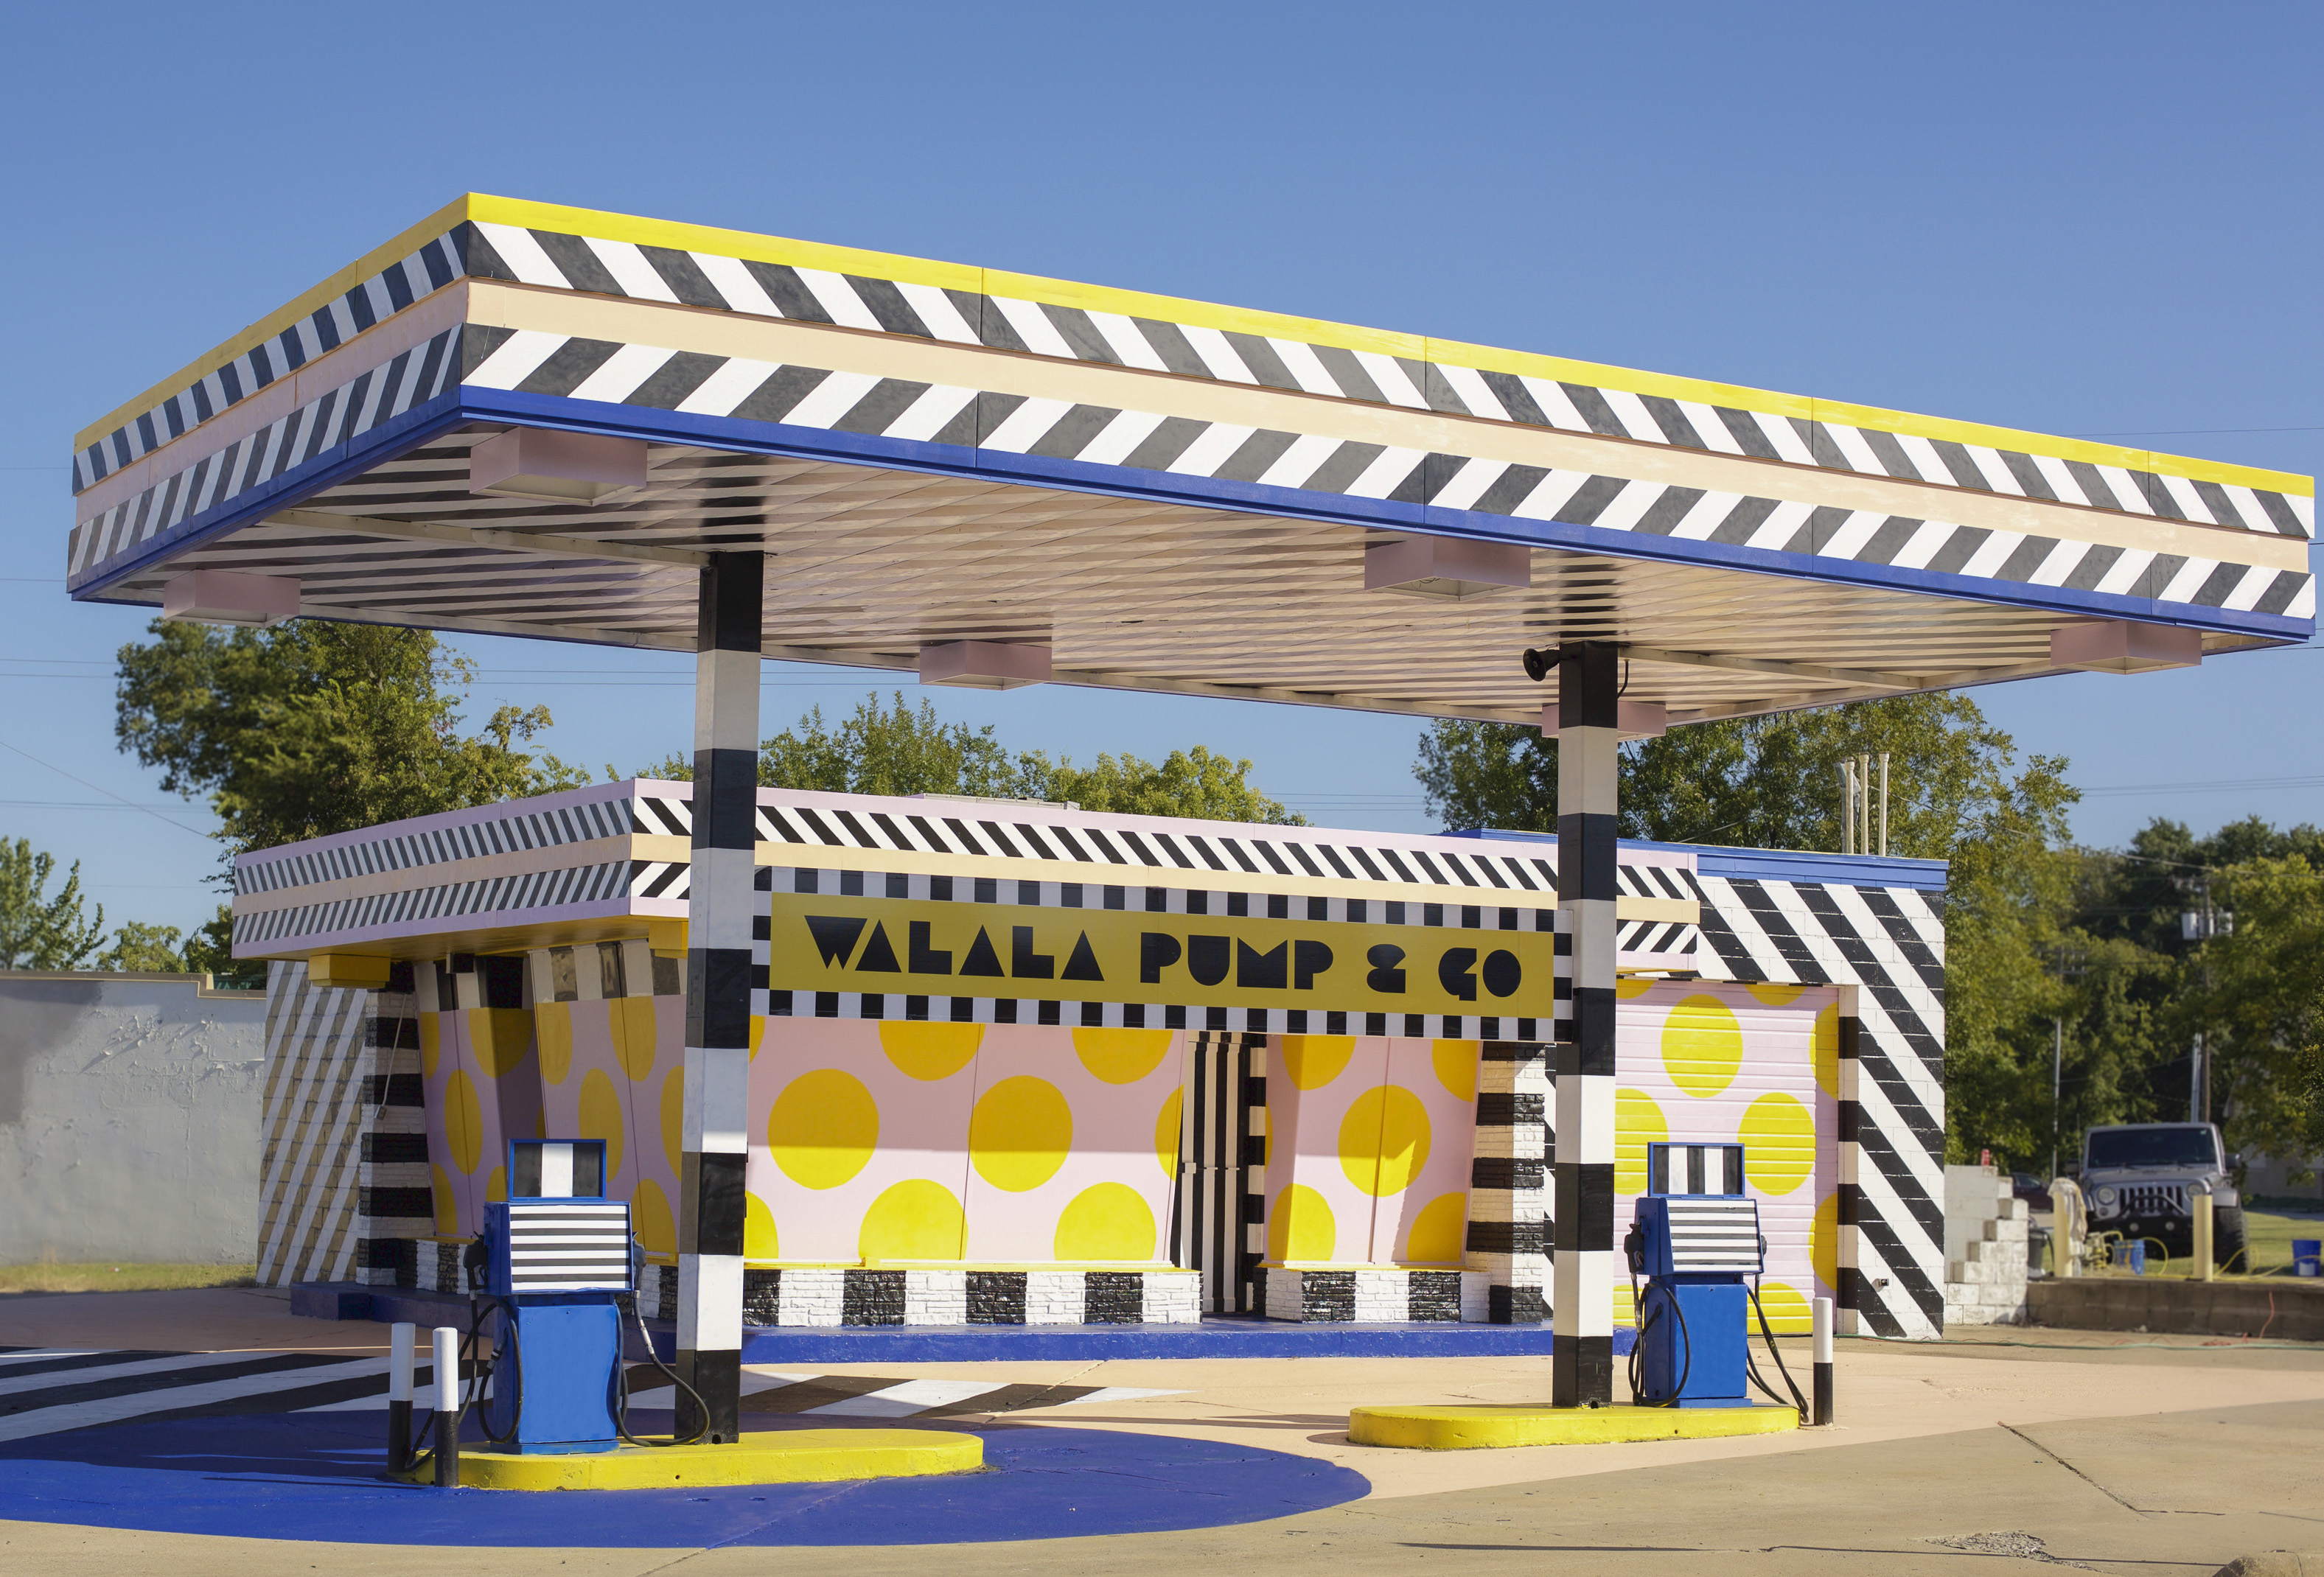 Gas station painted in colorful pattern